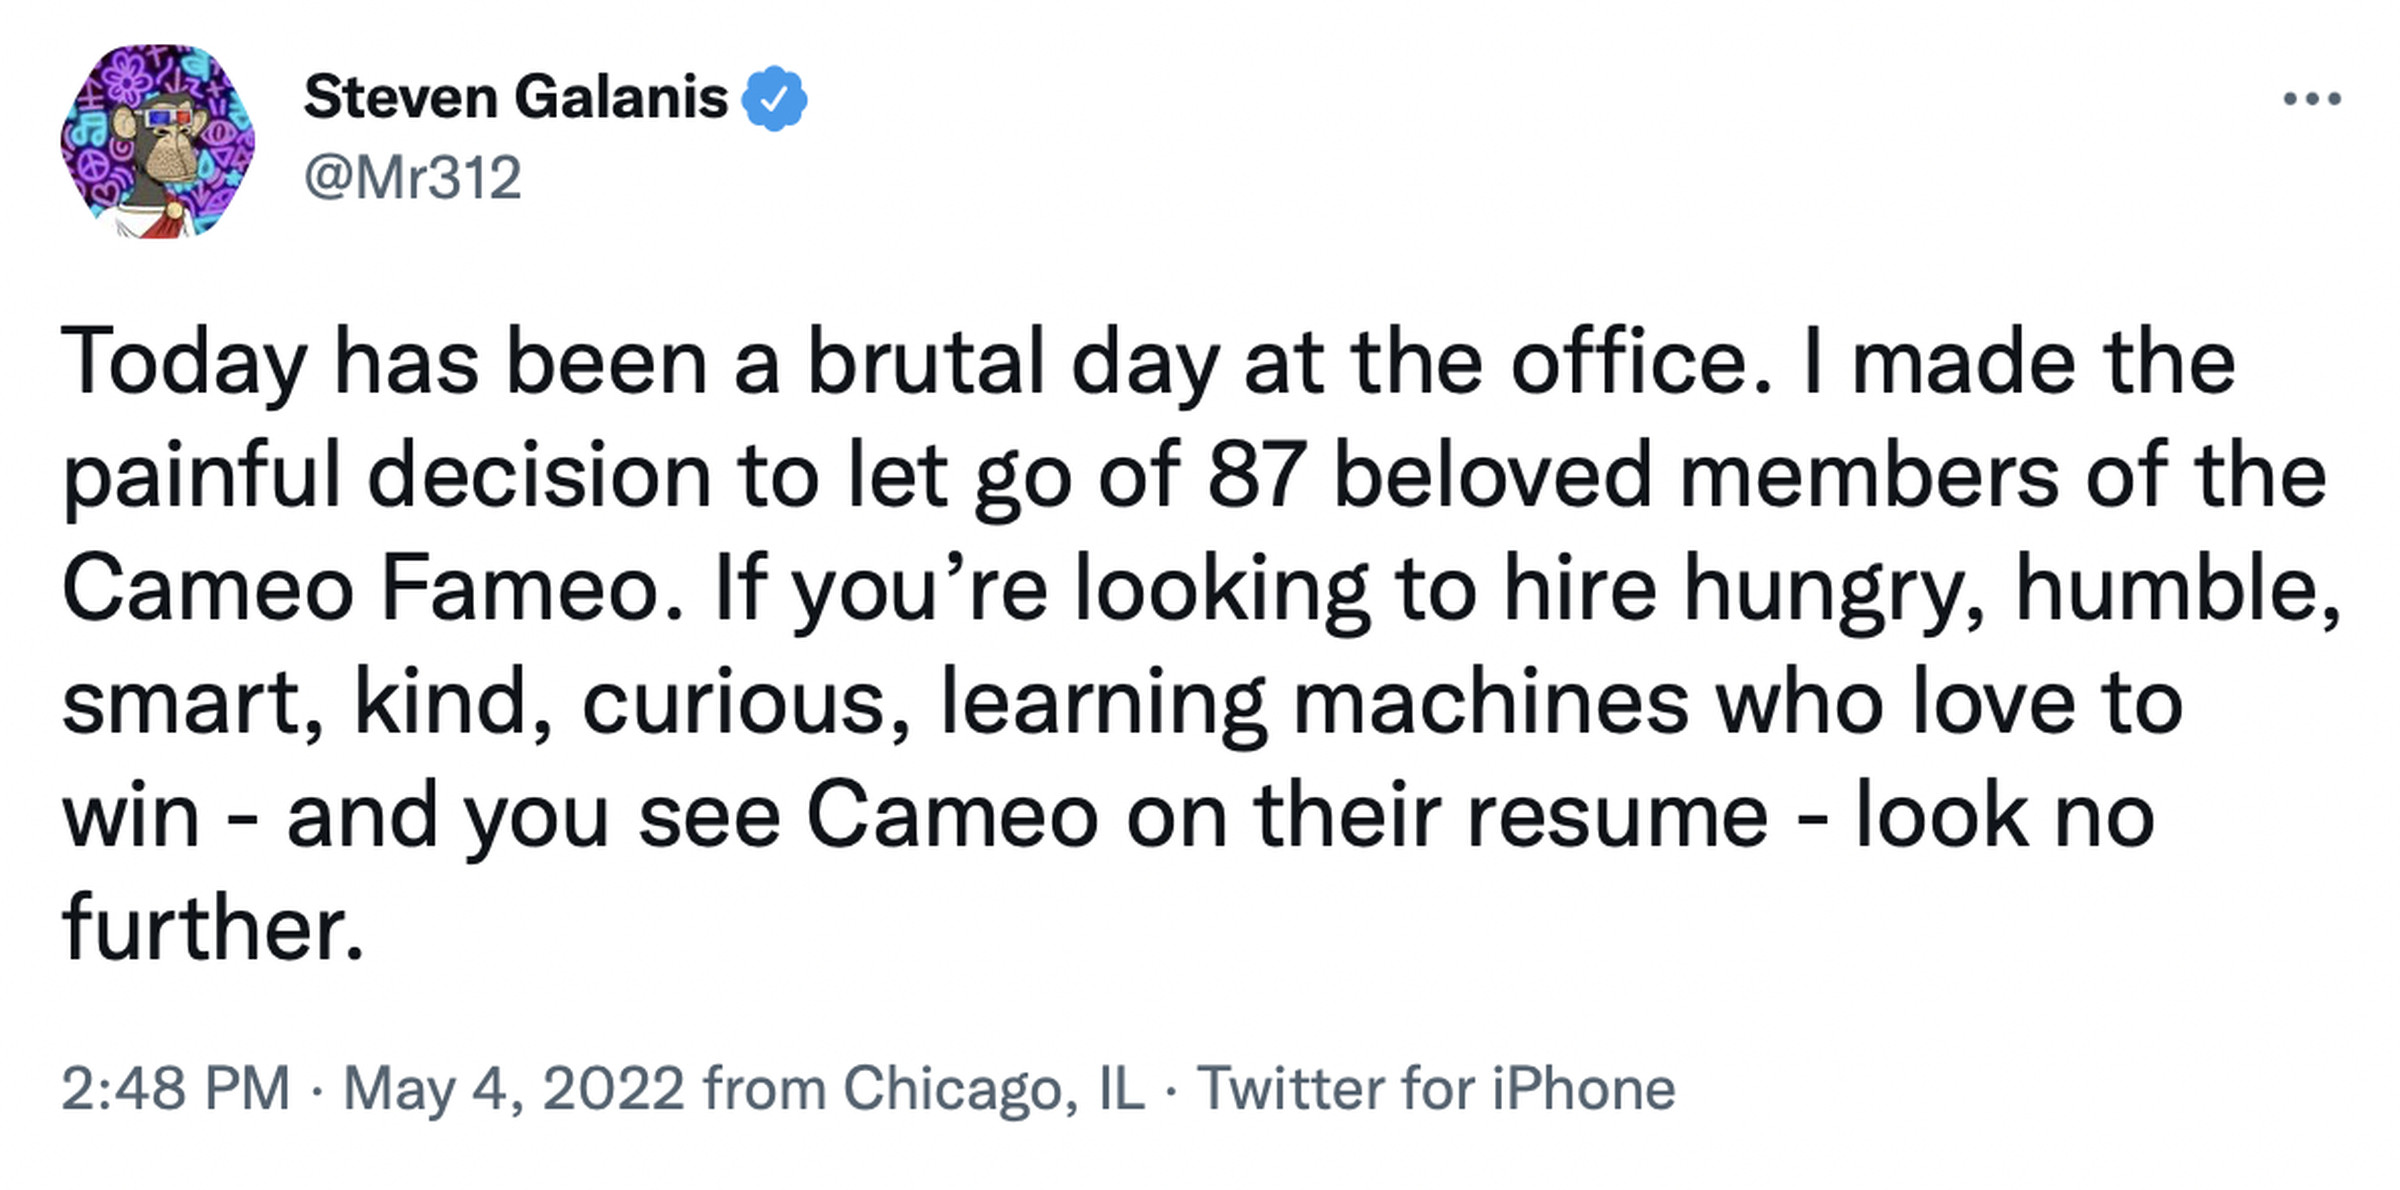 Today has been a brutal day at the office. I made the painful decision to let go of 87 beloved members of the Cameo Fameo. If you’re looking to hire hungry, humble, smart, kind, curious, learning machines who love to win - and you see Cameo on their resume - look no further.